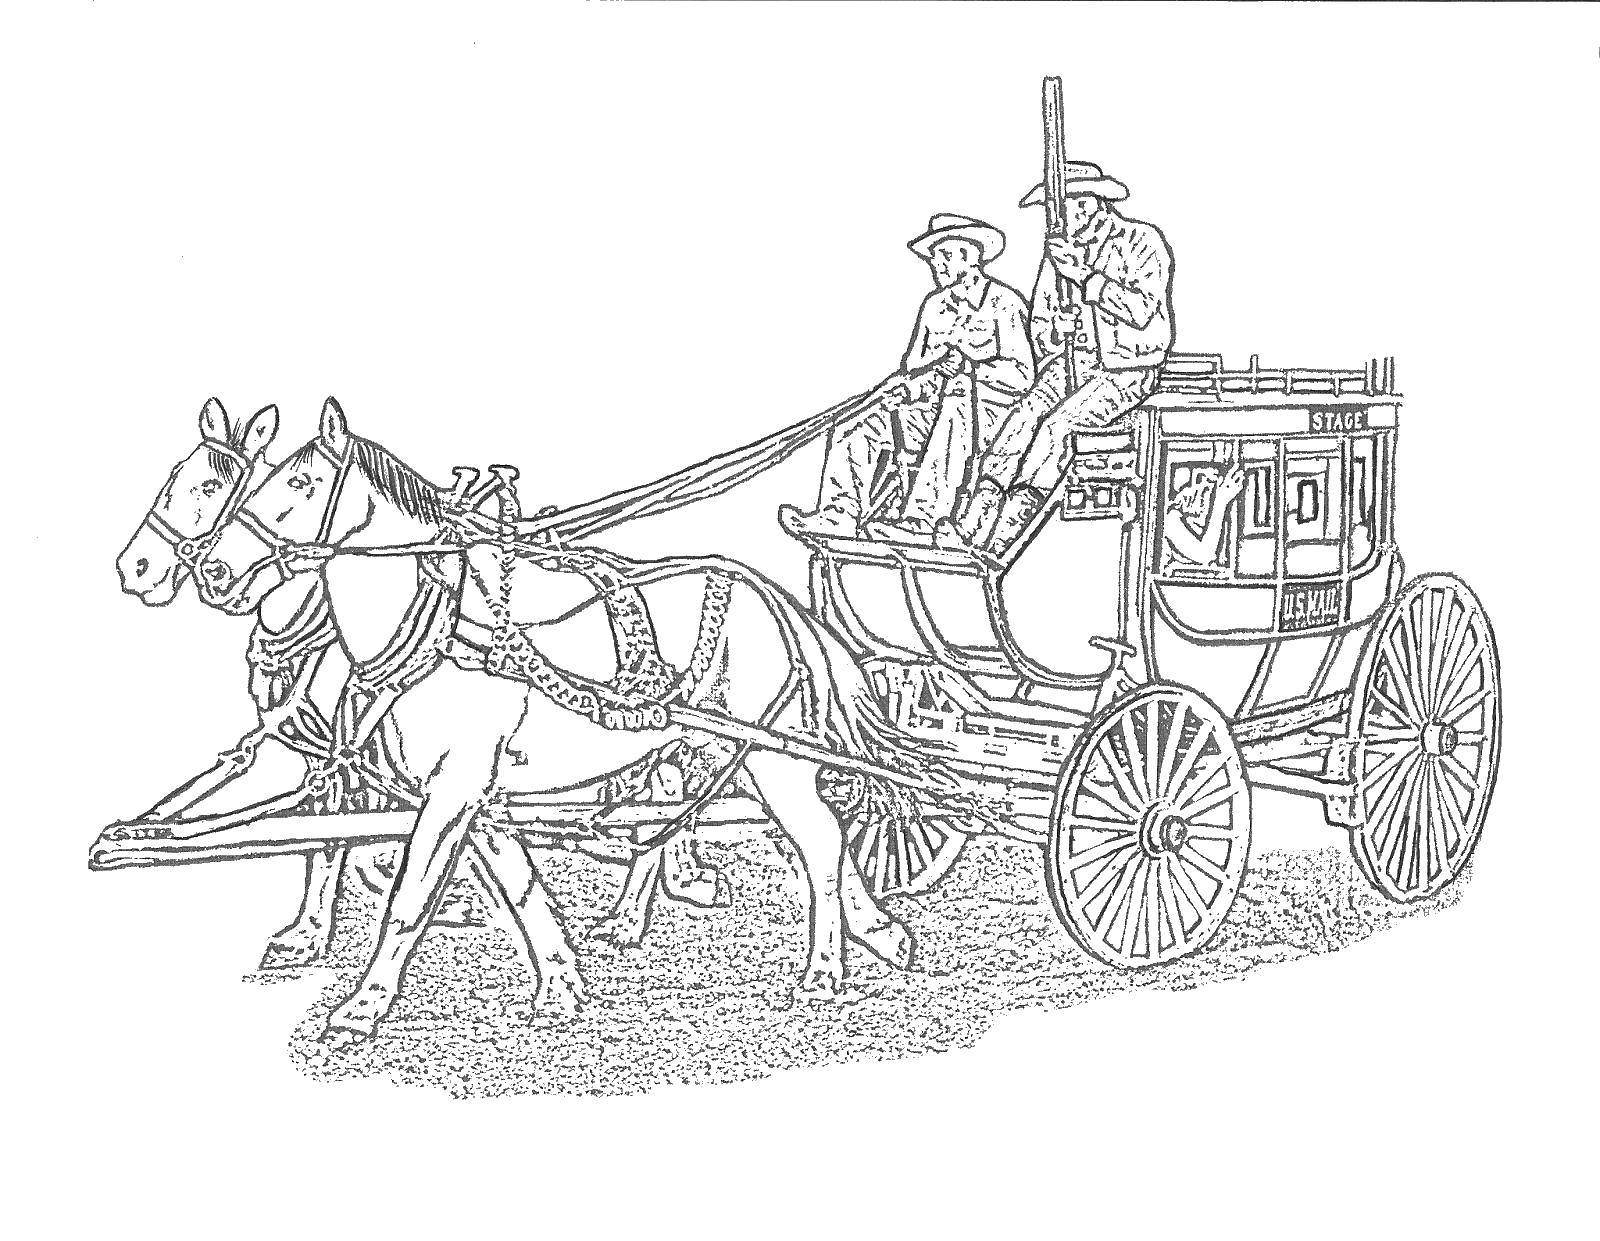 Coloring Horse drawn carriage ride. Category horse. Tags:  horse, carriage.